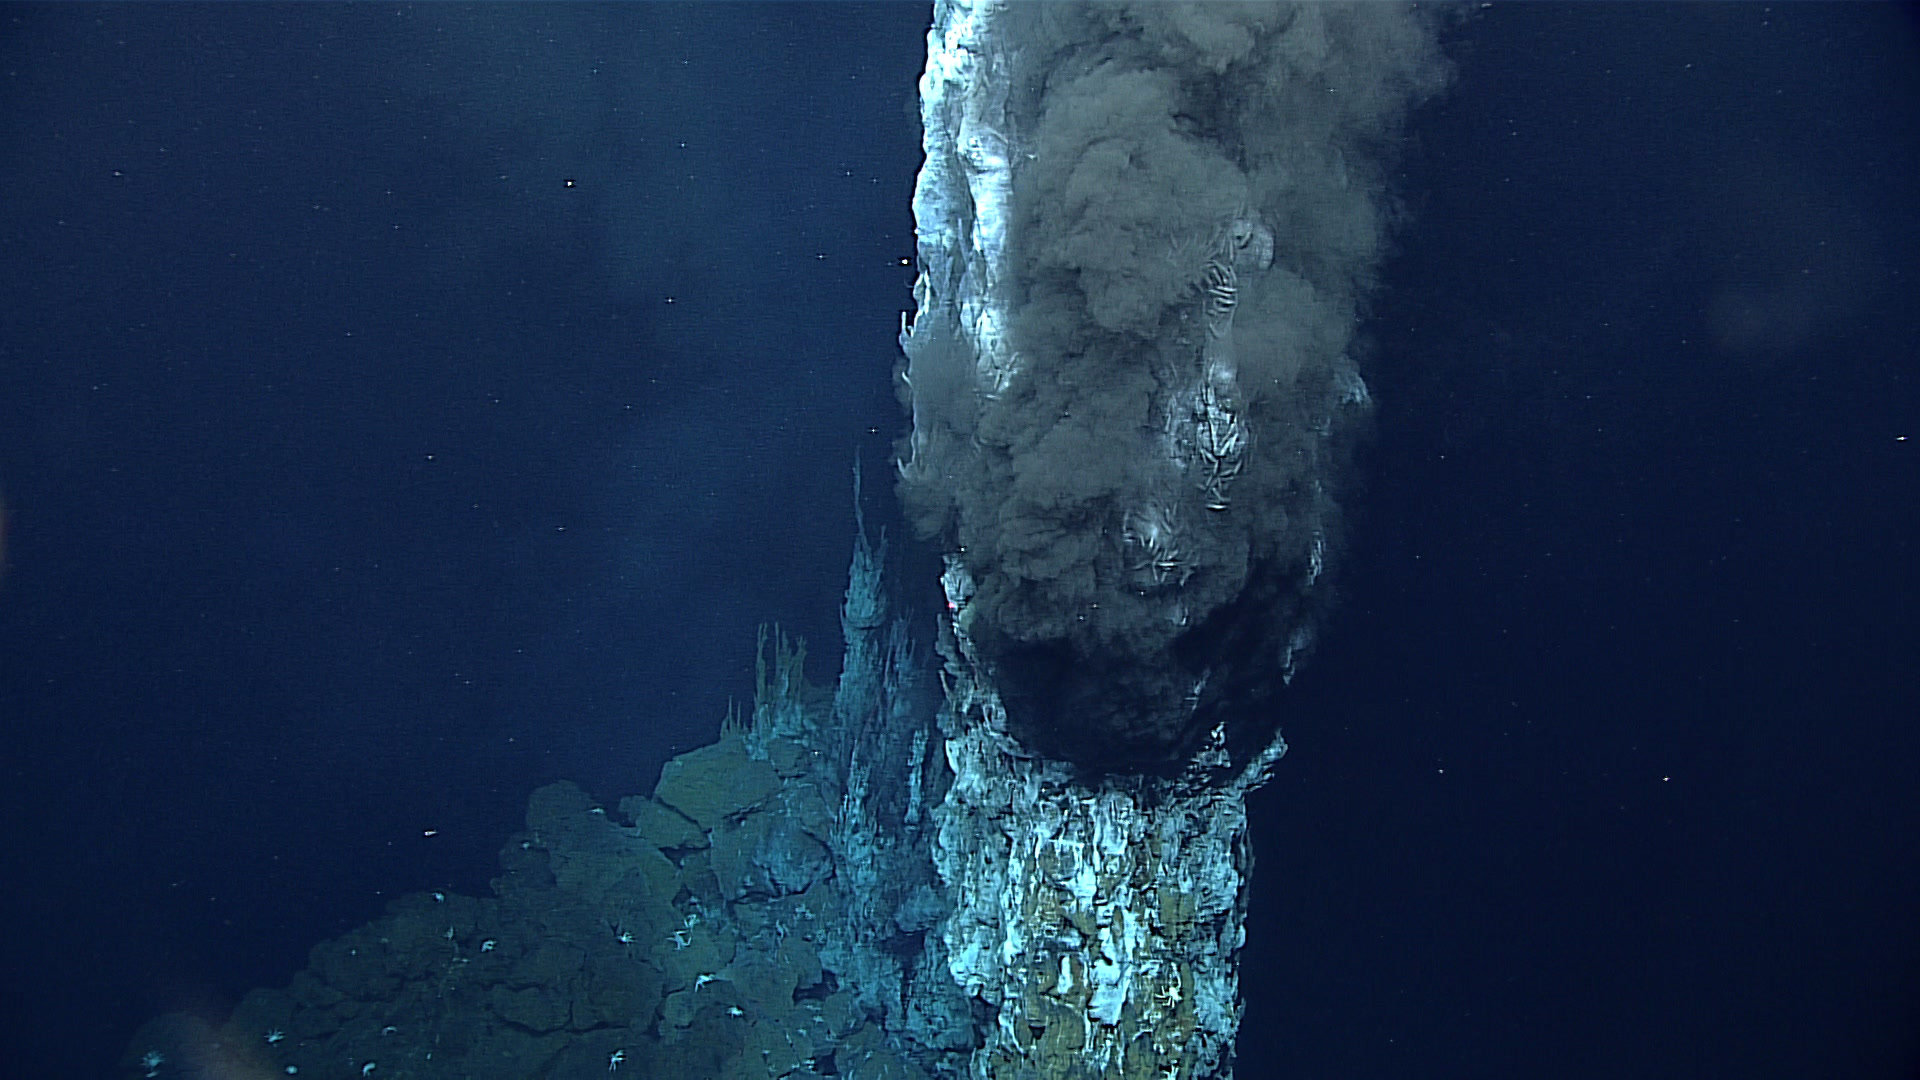 Hydrothermal Vents